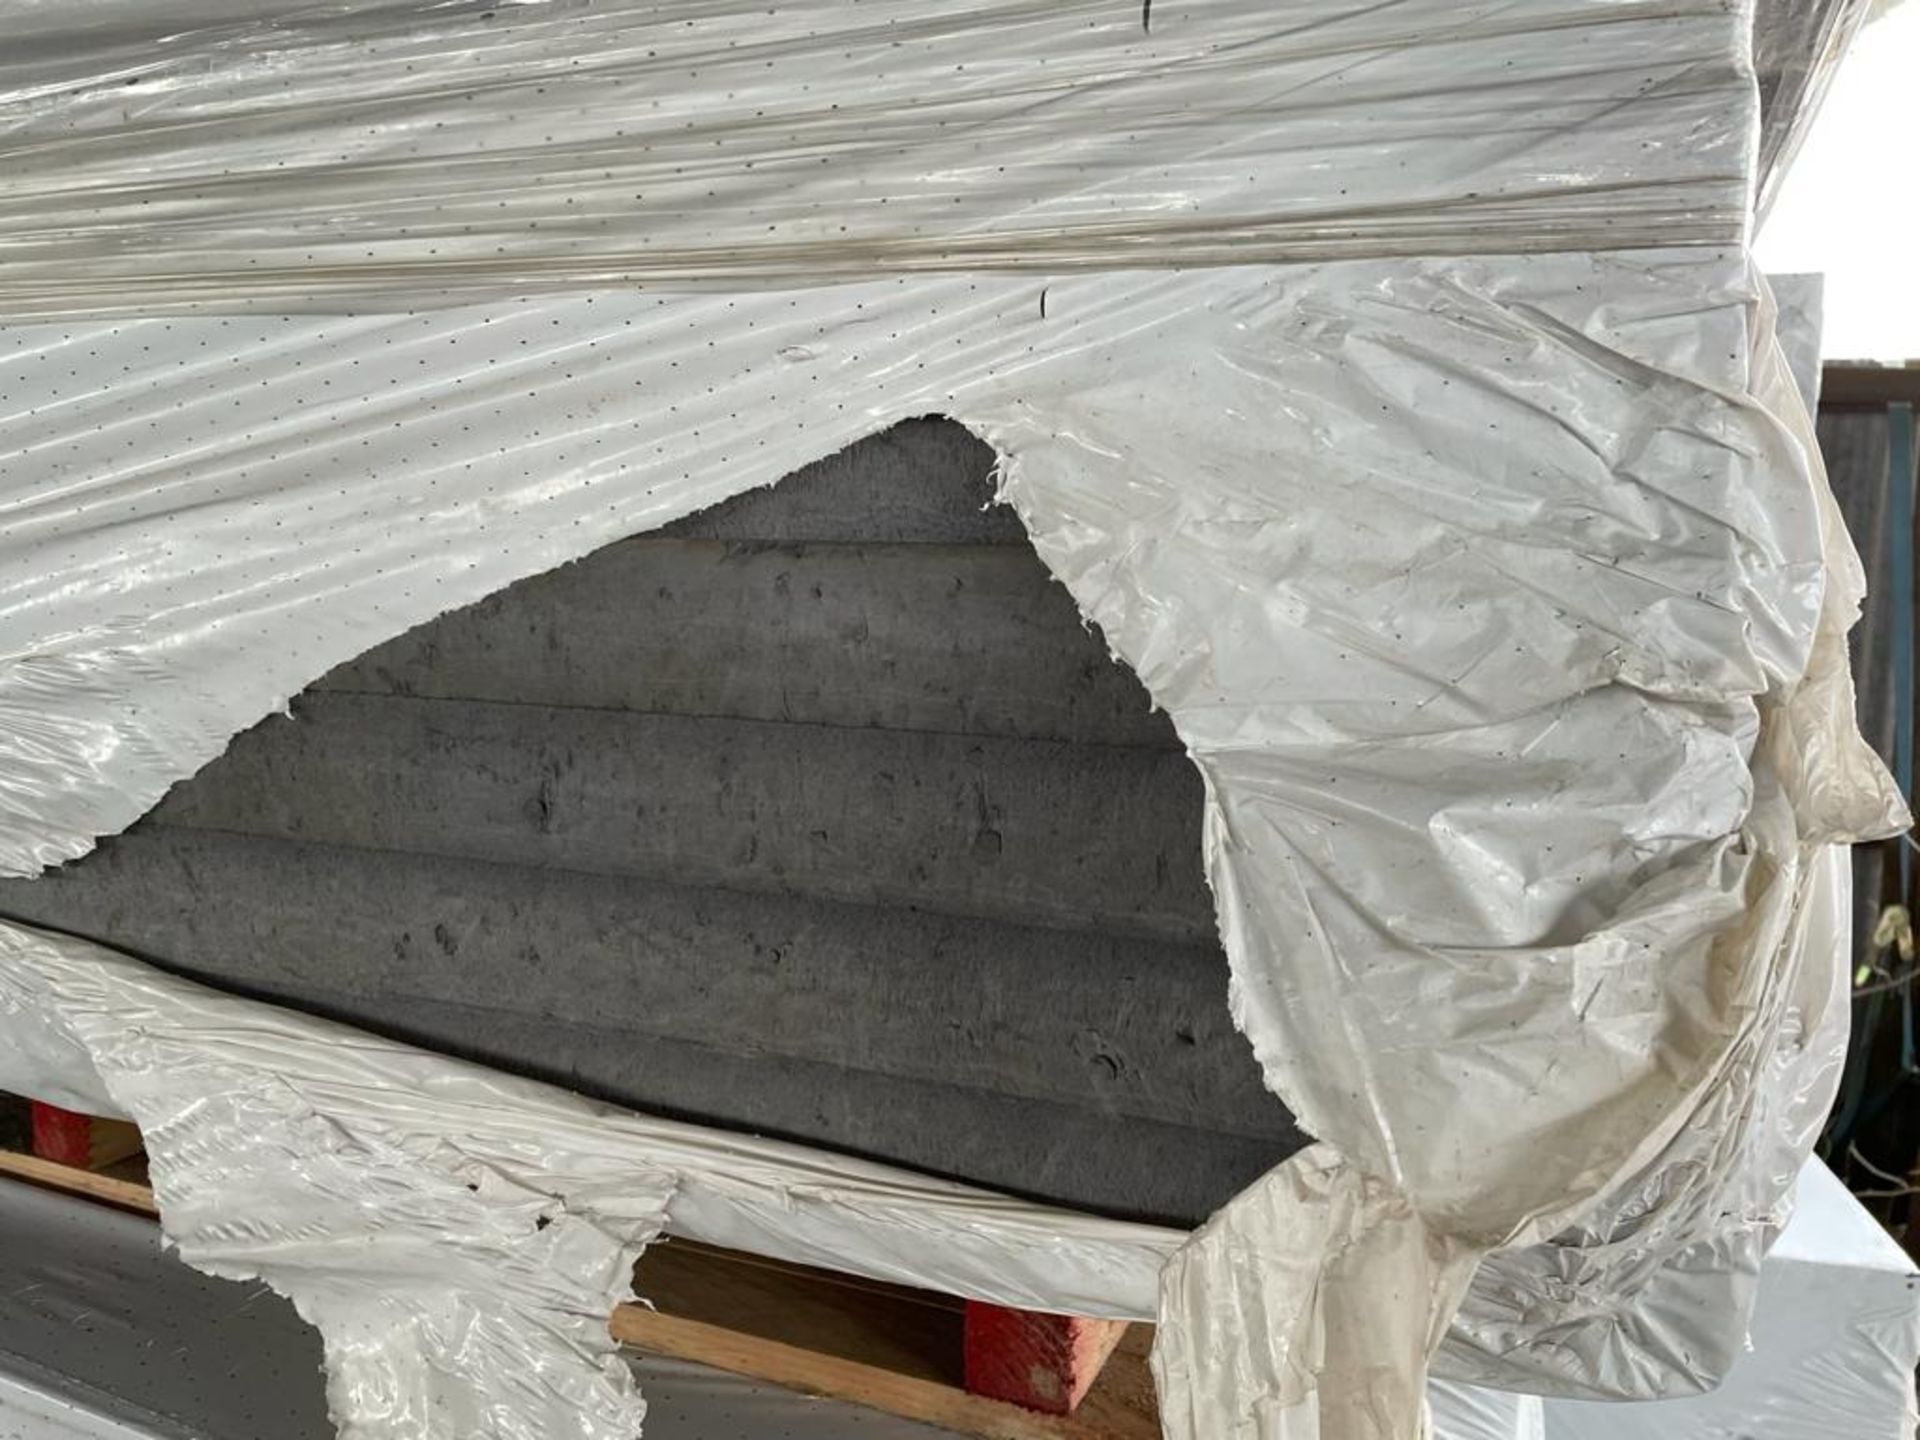 14 x Xenergy RTM Plus Extruded Polystyrene Thermal Insulation Boards - Size: 600 x 2500 x 60mm - - Image 7 of 7